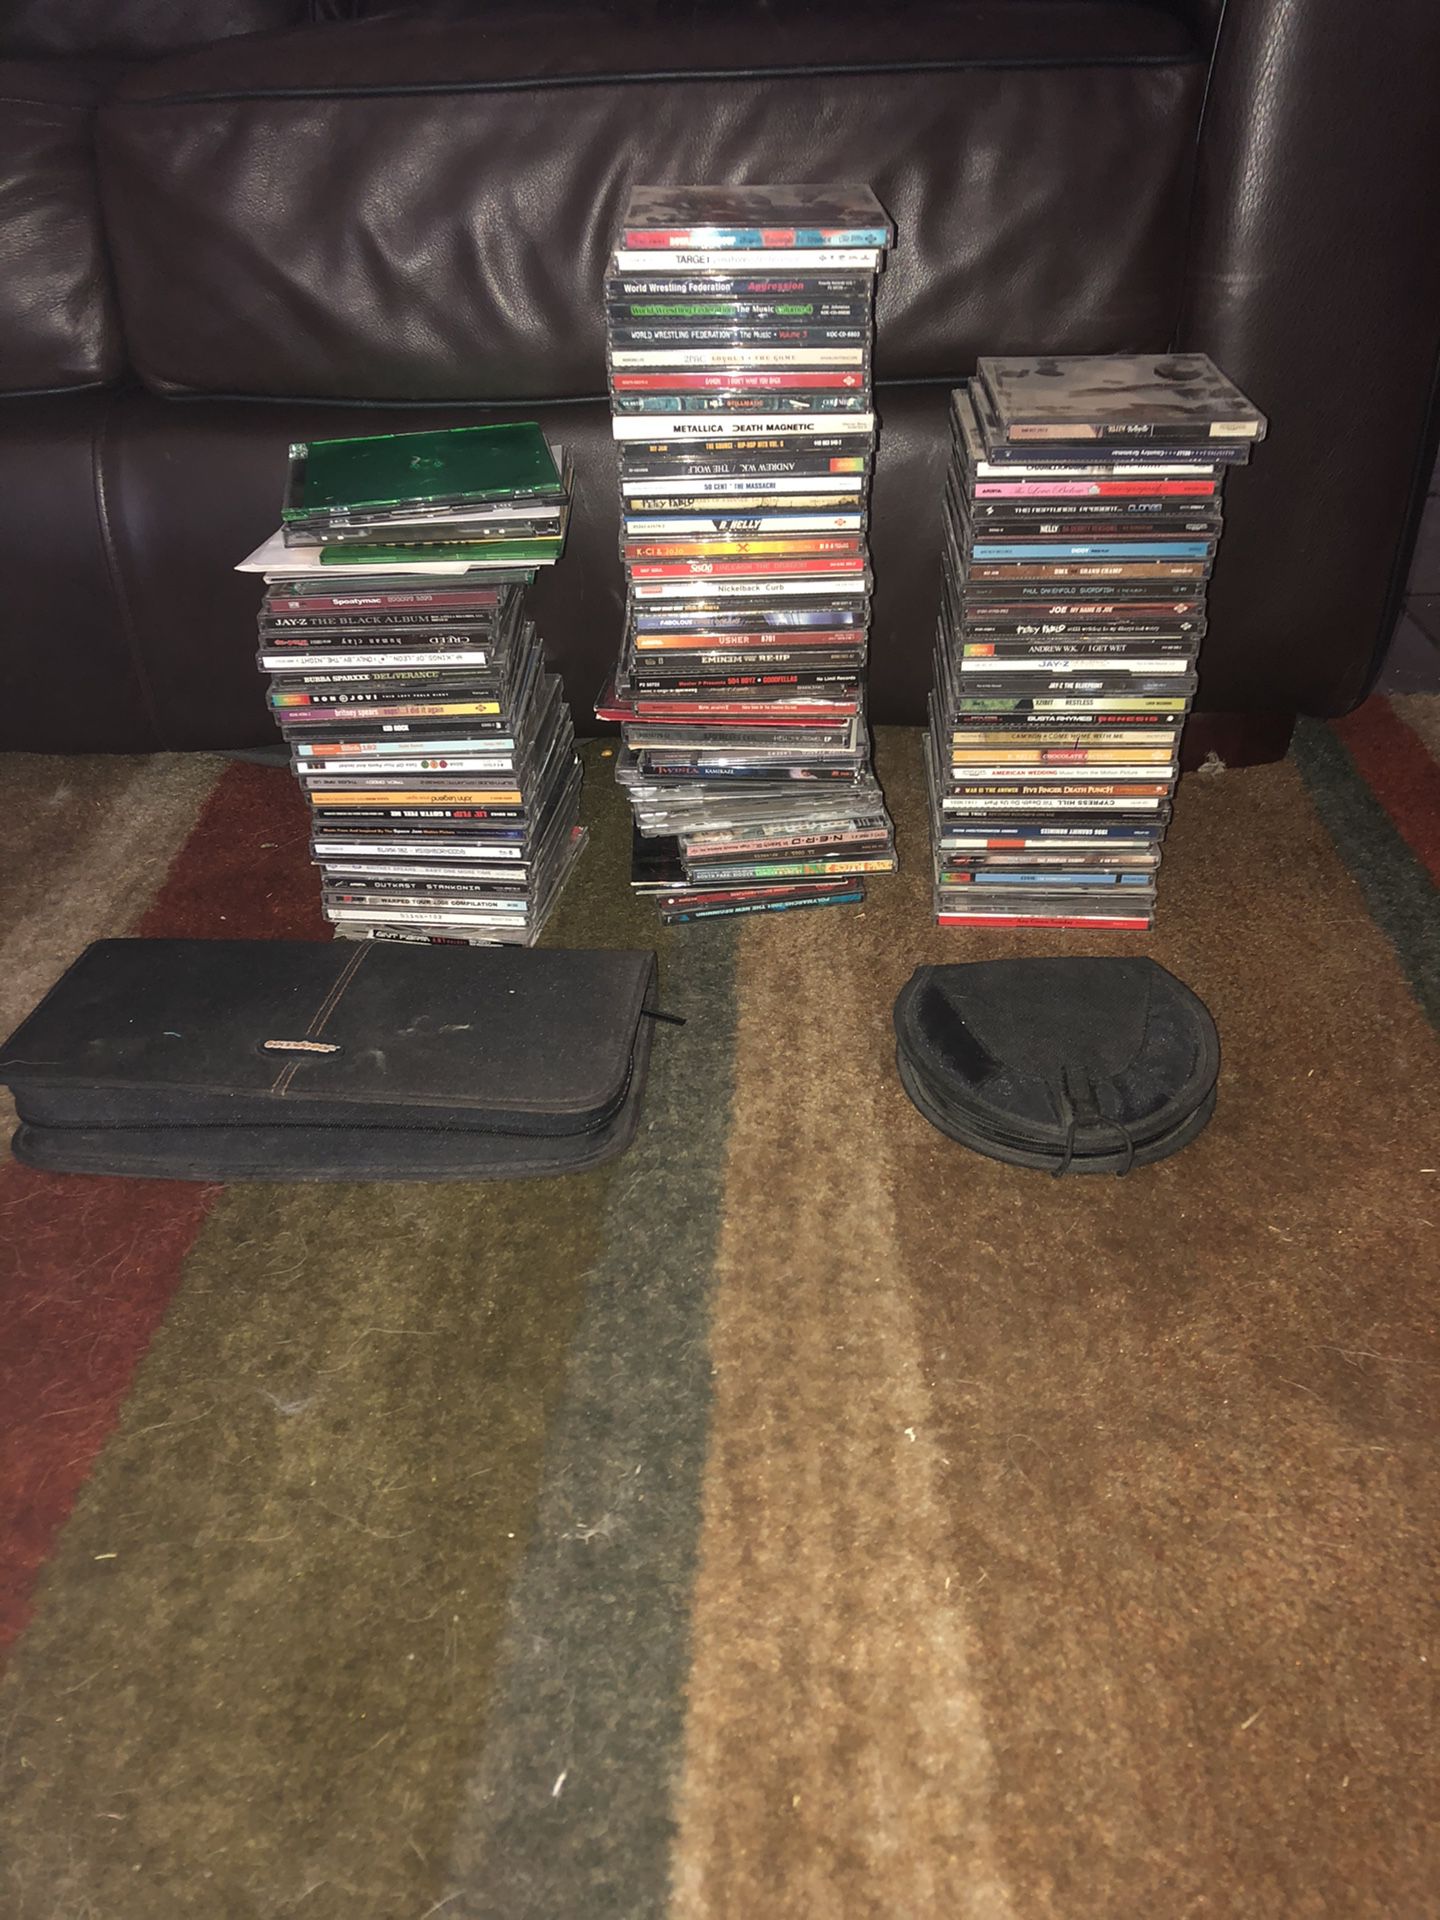 150 CDs, mostly rap, open to offers/trades